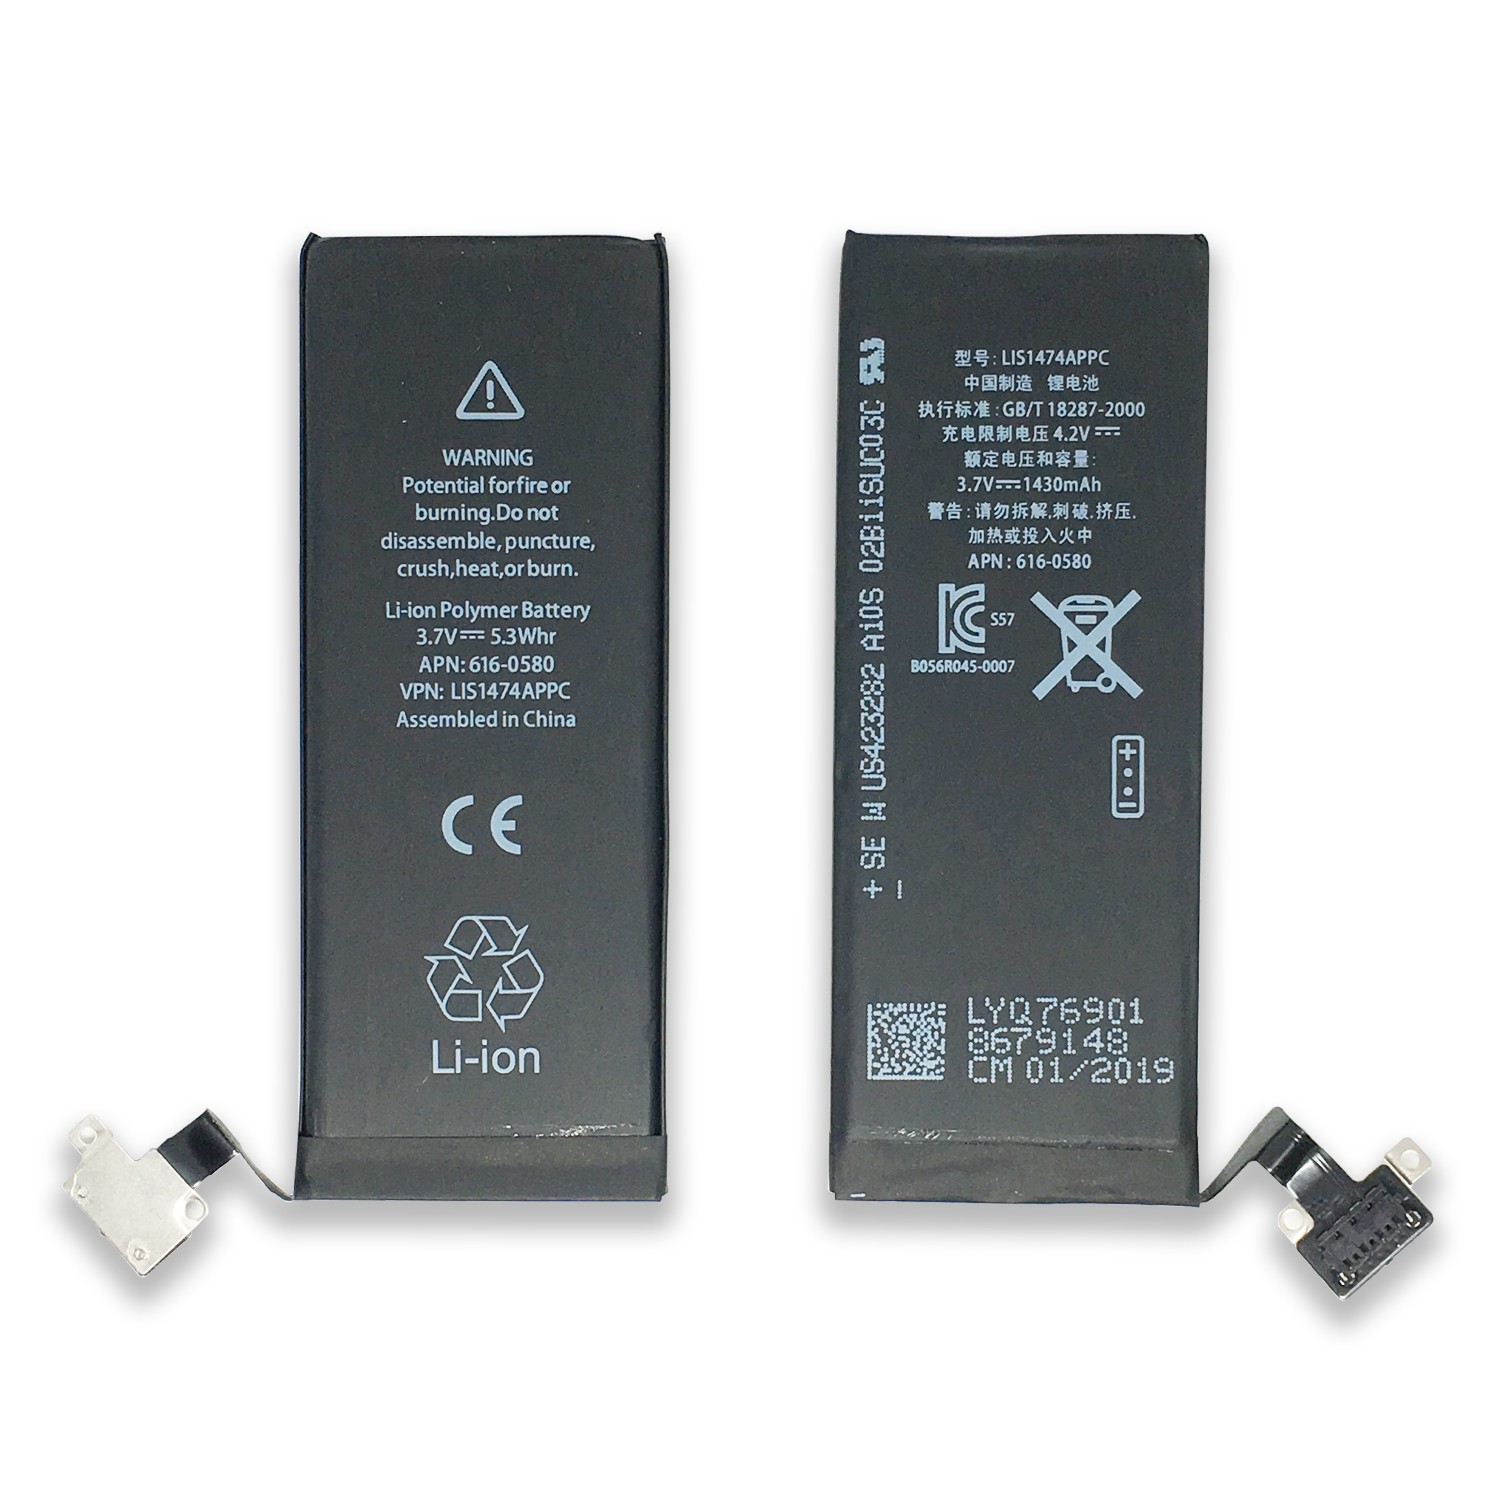 Mobile Phone Batteries 1430mAh for iPhone 4S battery